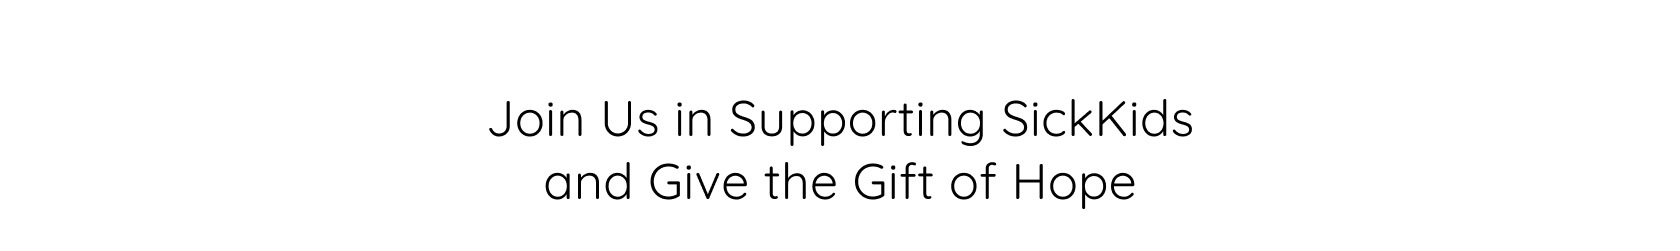 Join us in supporting SickKids and give the gift of hope